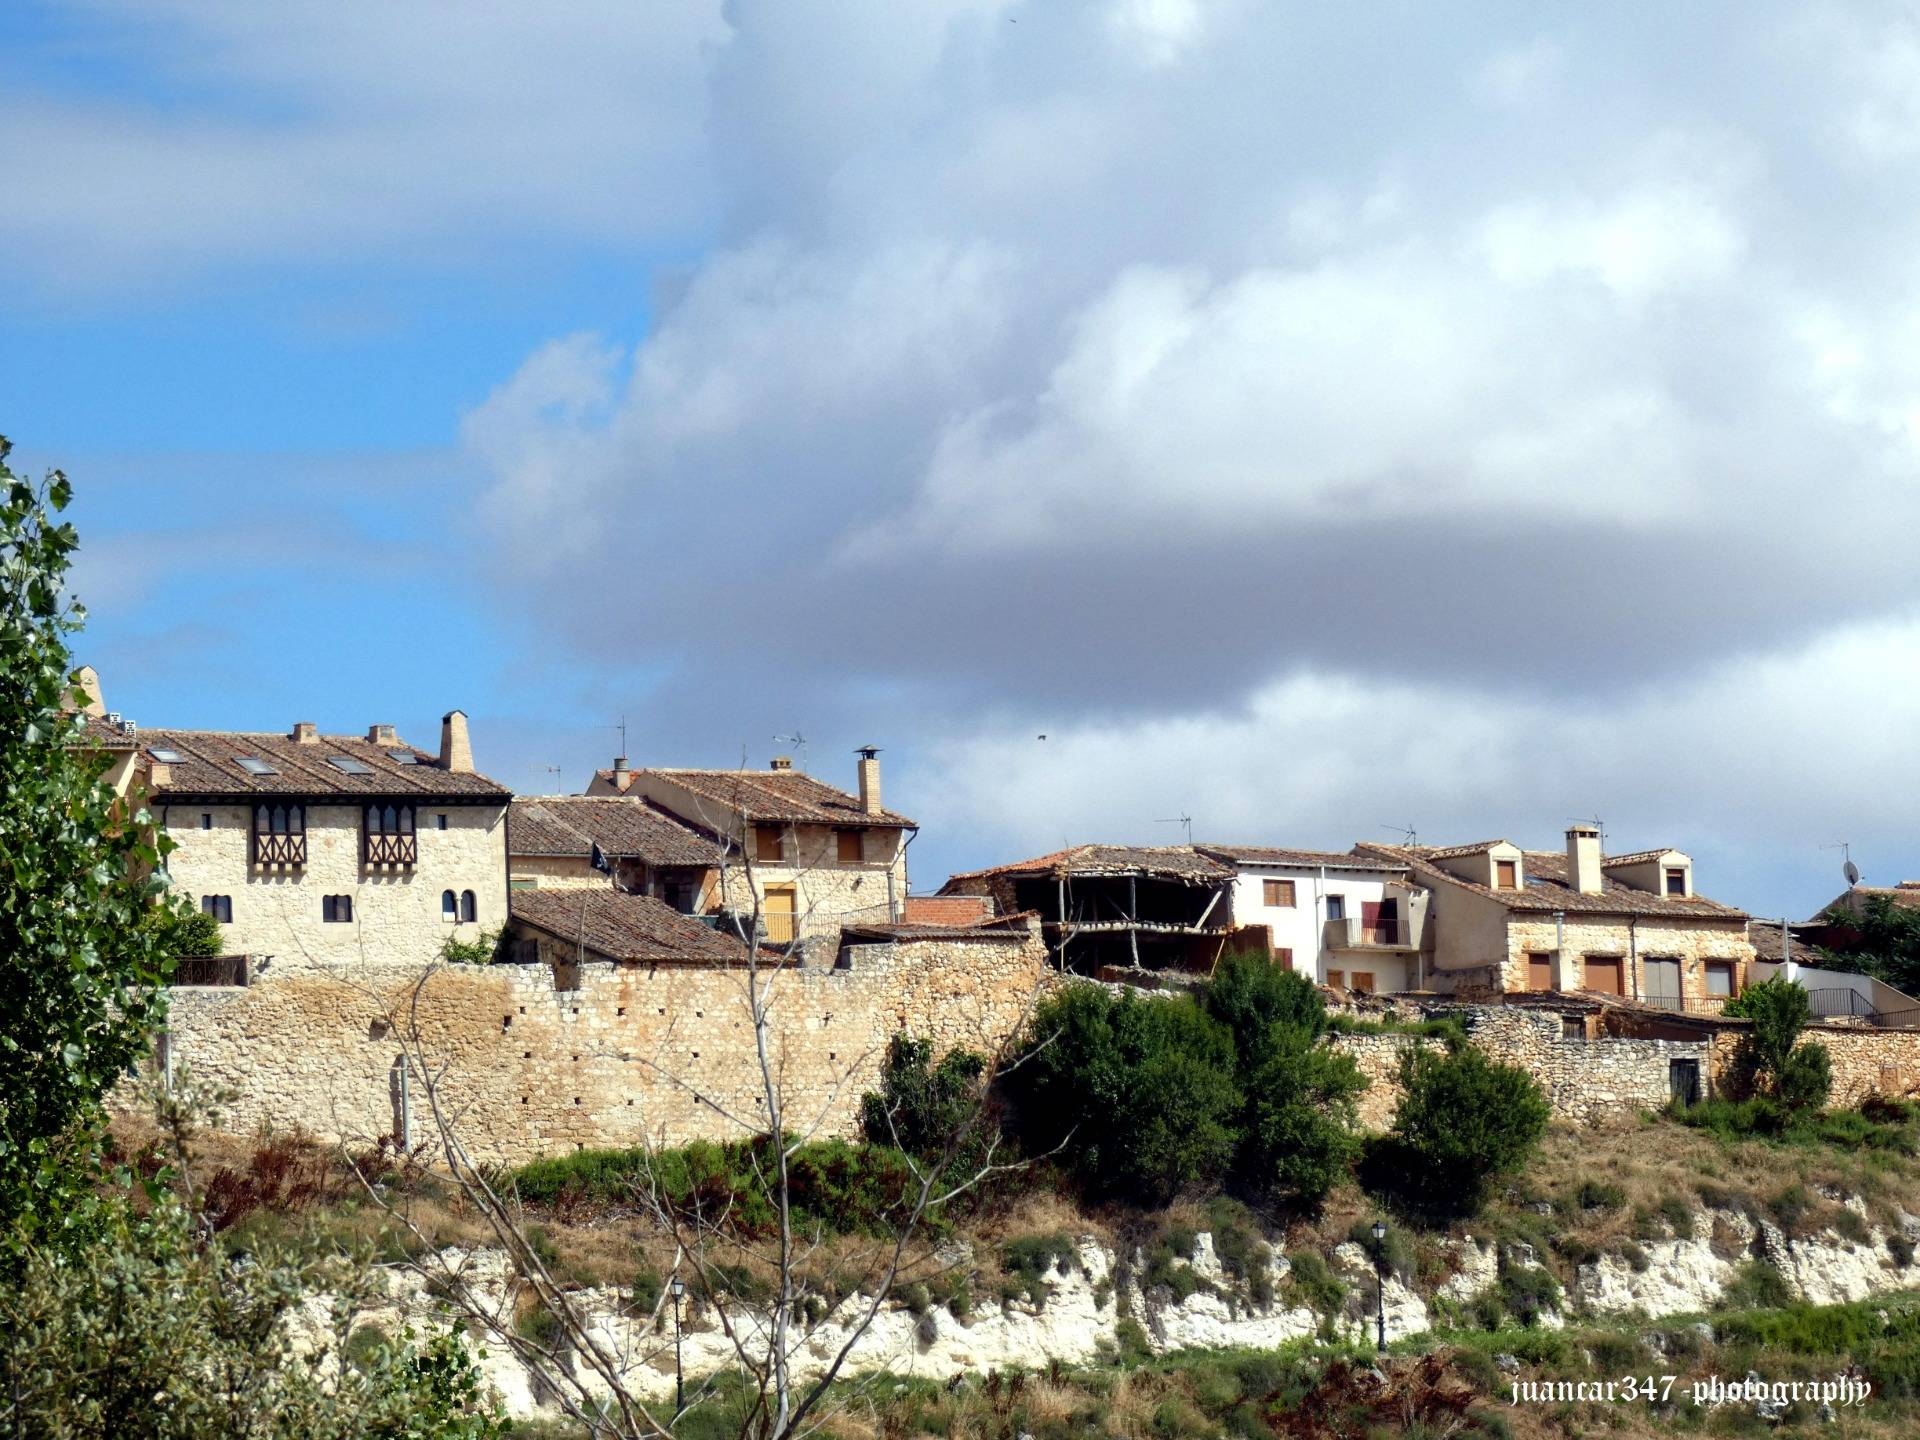 The town and part of the old walls